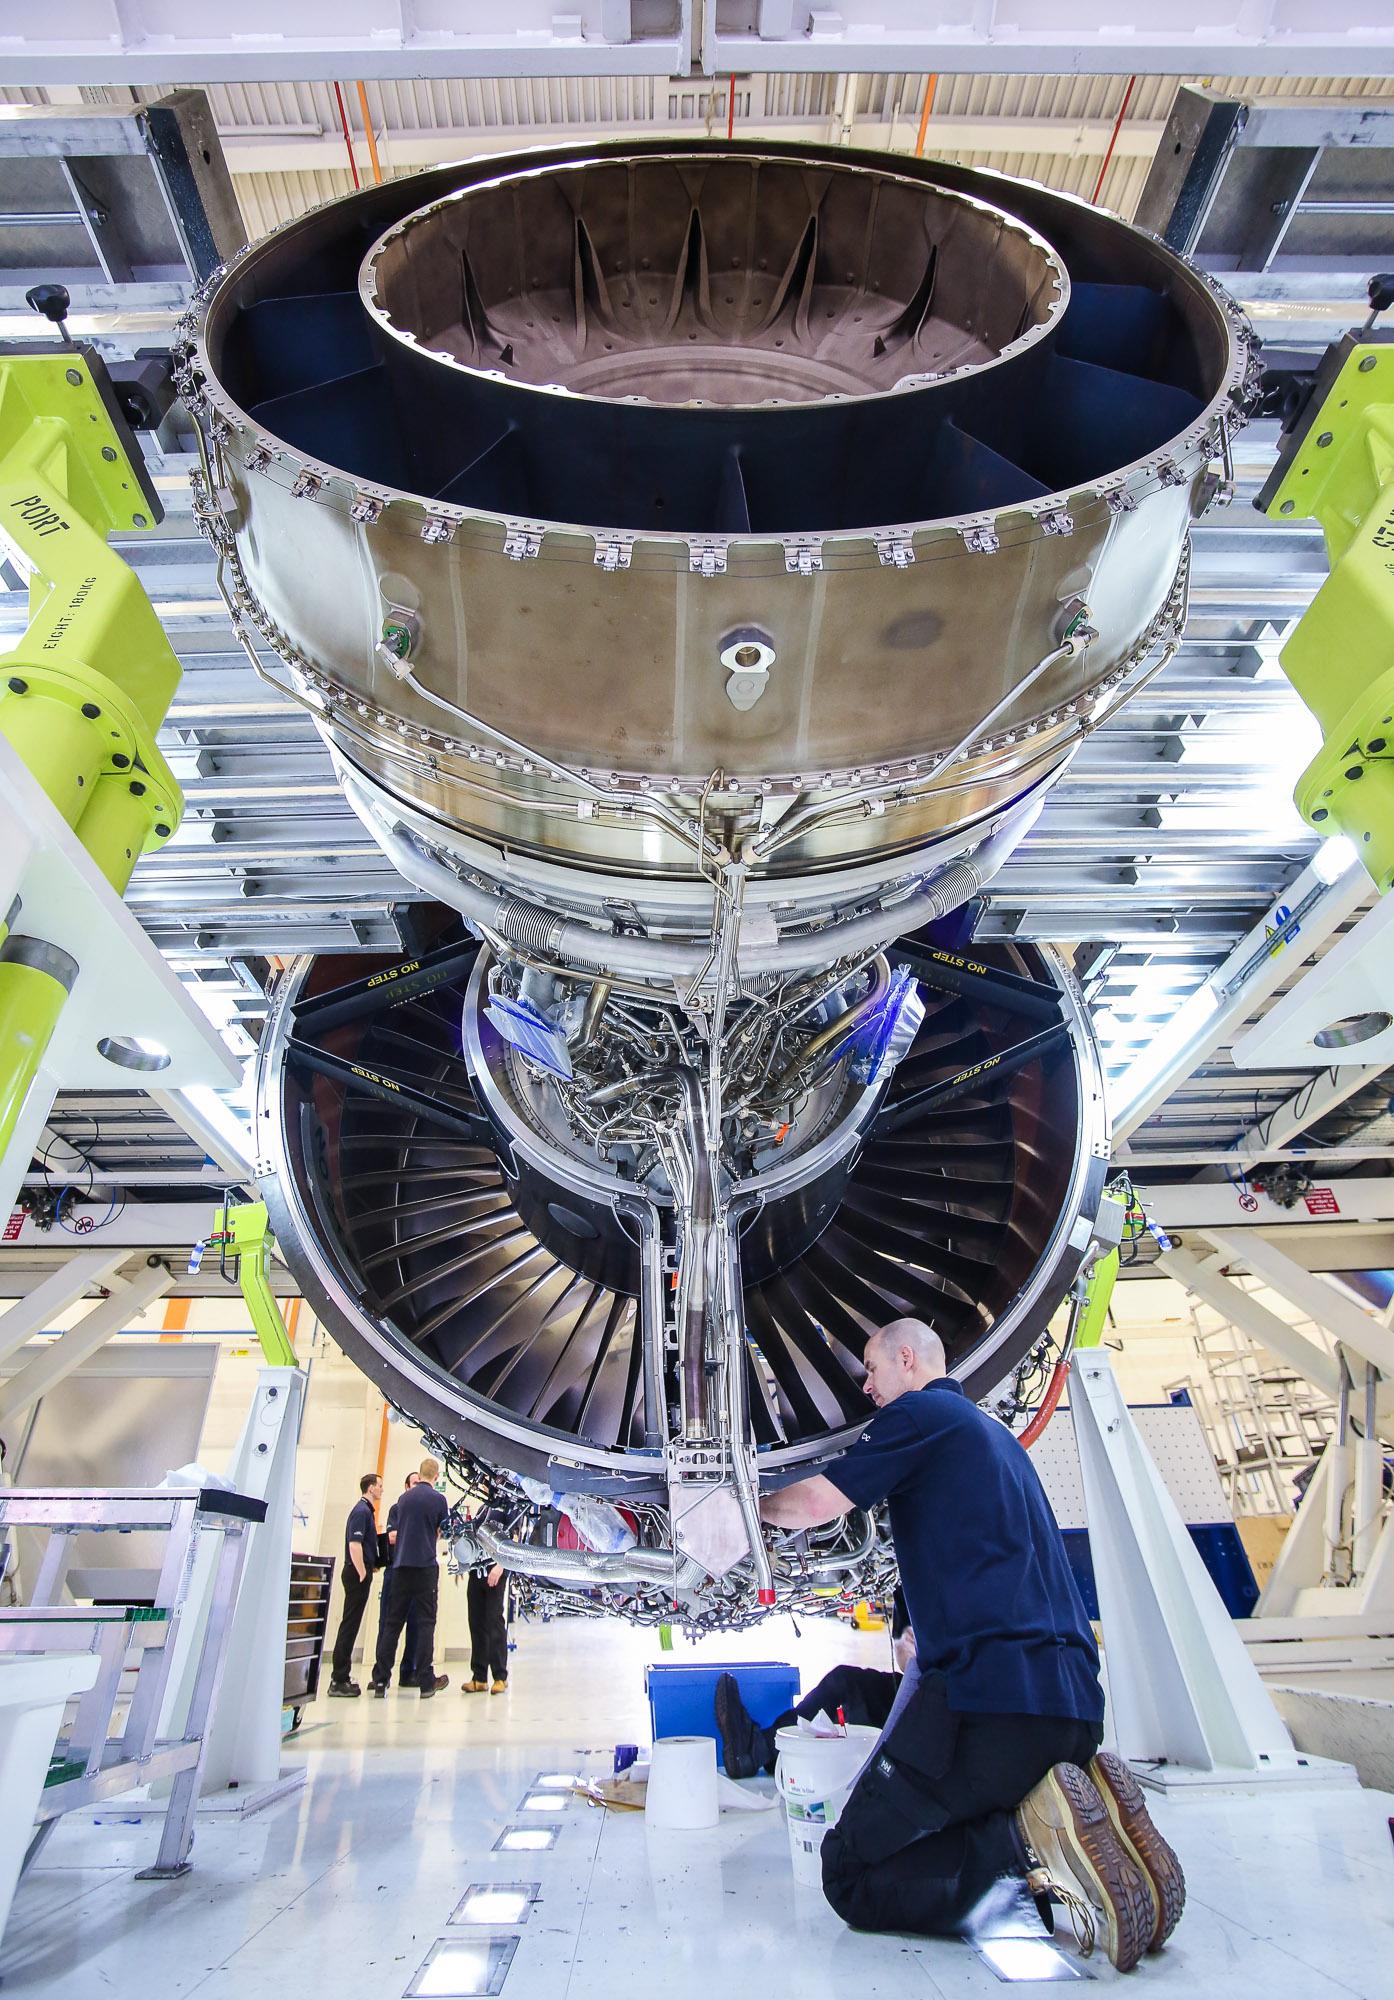 Six Facts About The Trent XWB Engine | Aviation Week Network